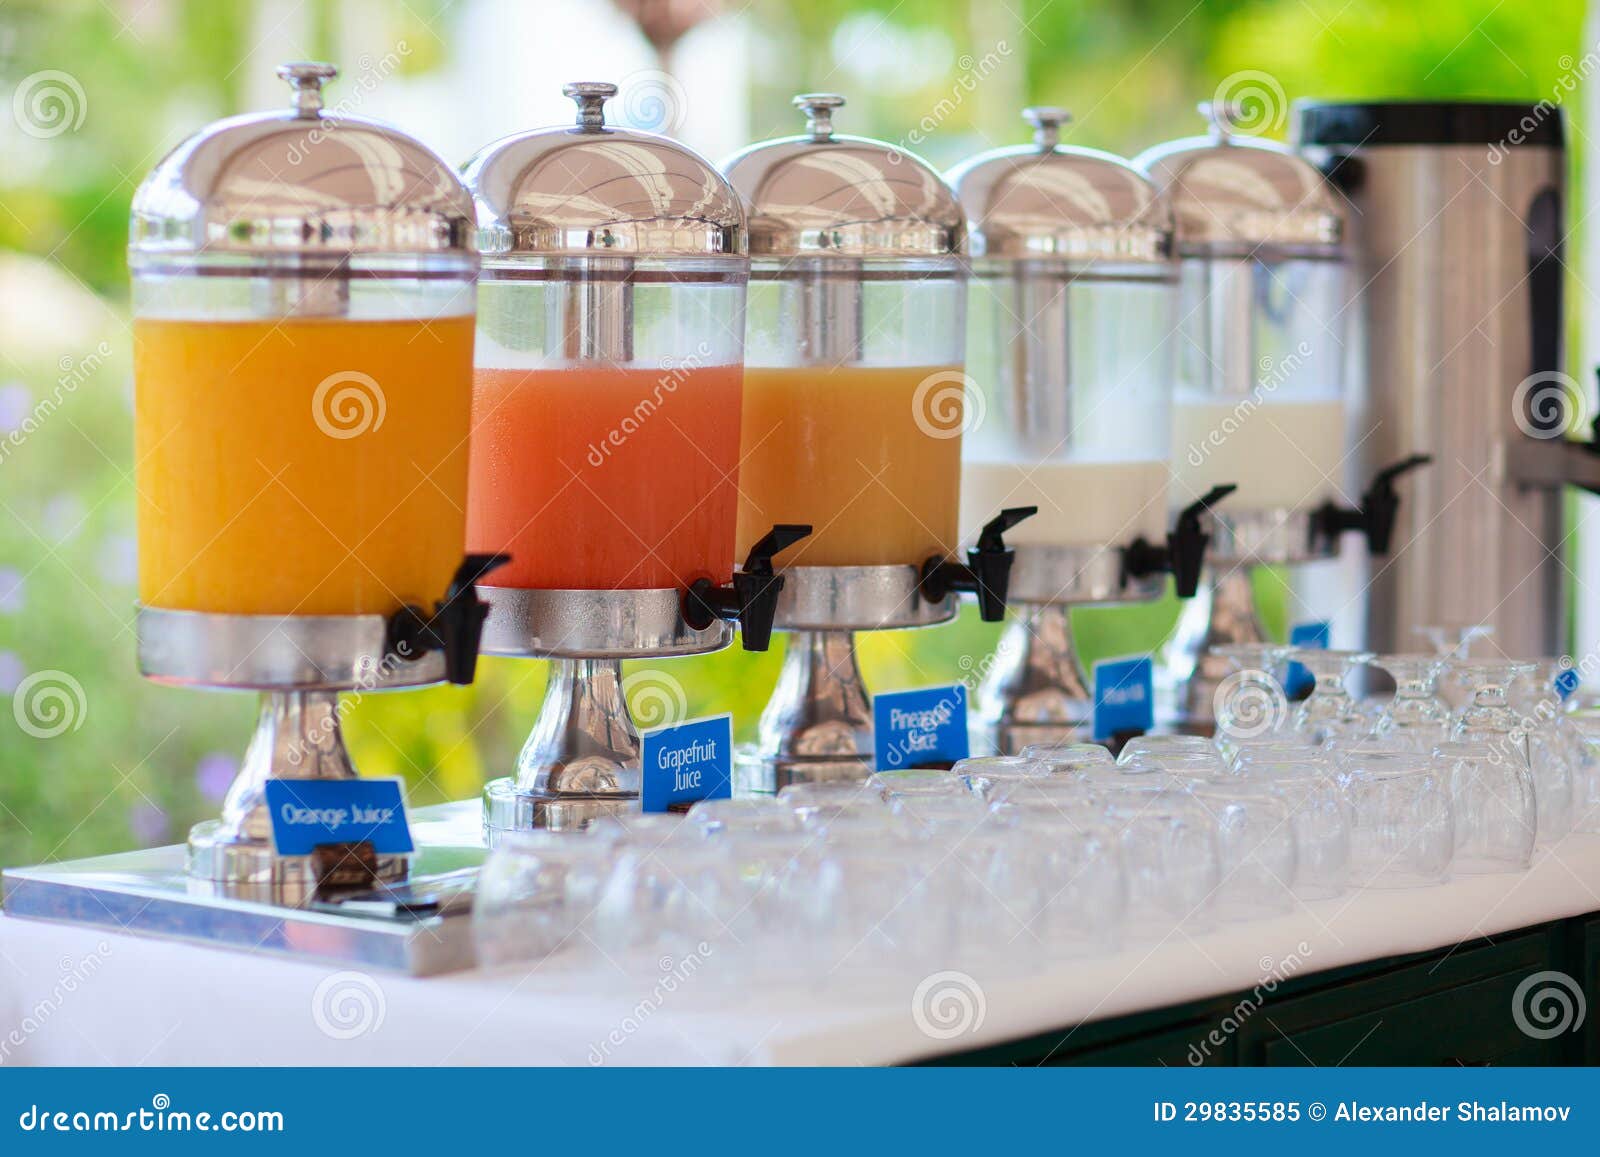 Juice At Buffet Restaurant Stock Image Image Of Kitchen 29835585